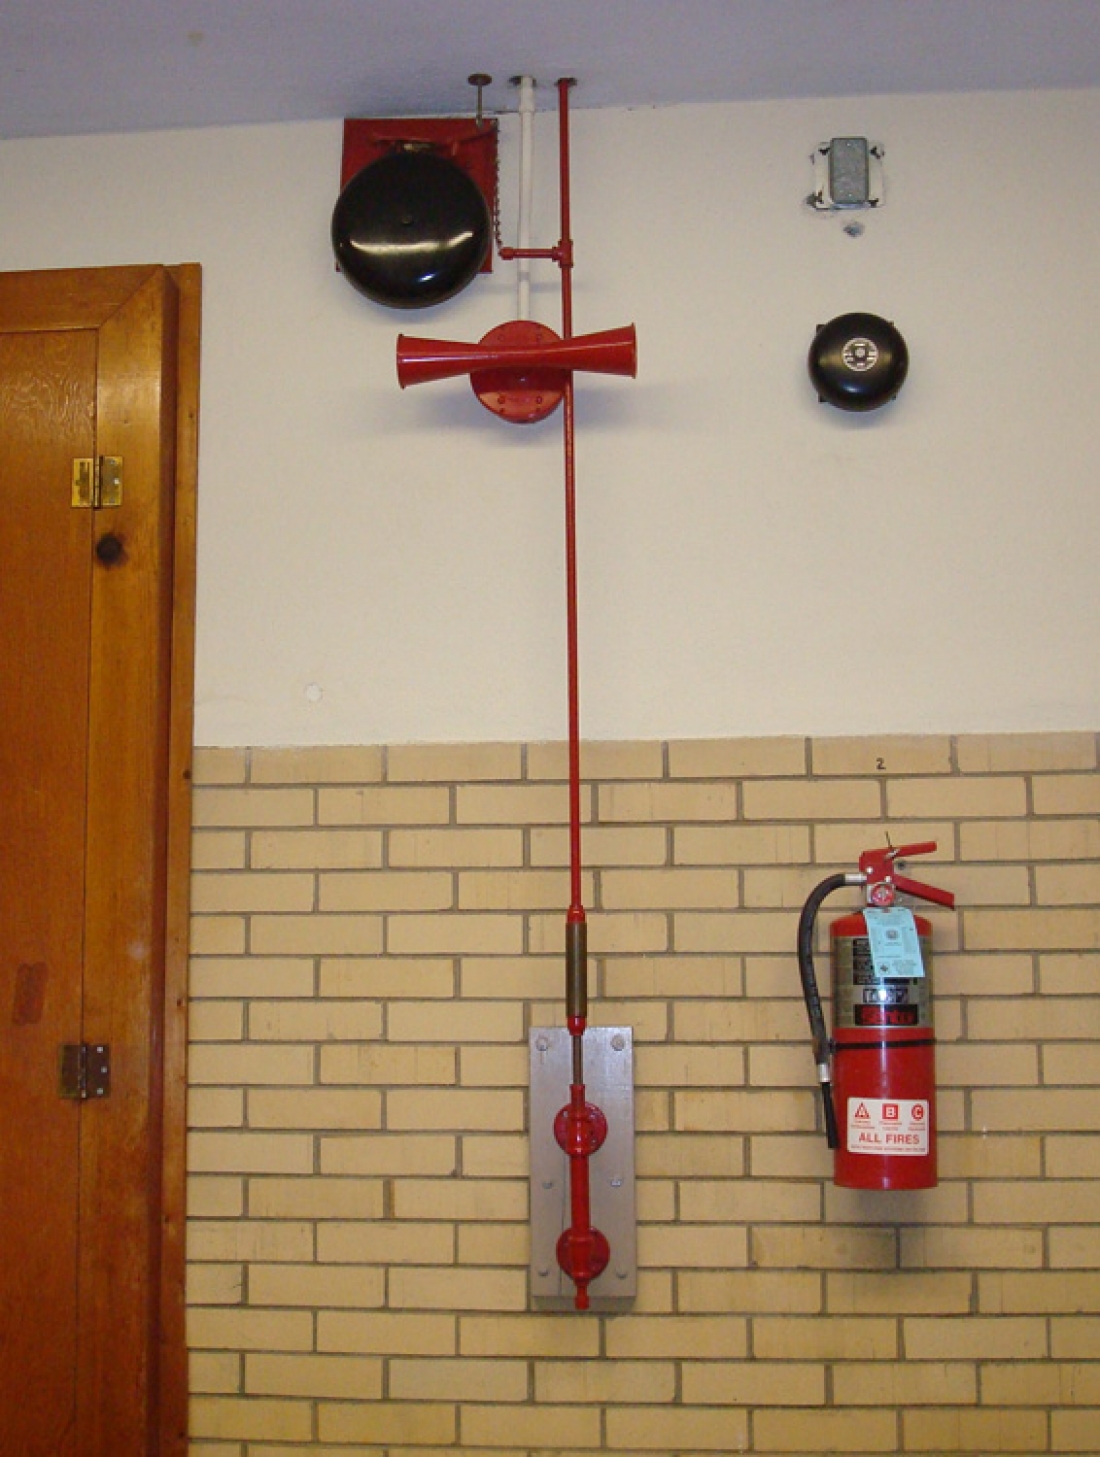 Old School Fire Alarms – Pull Rod Fire Alarms